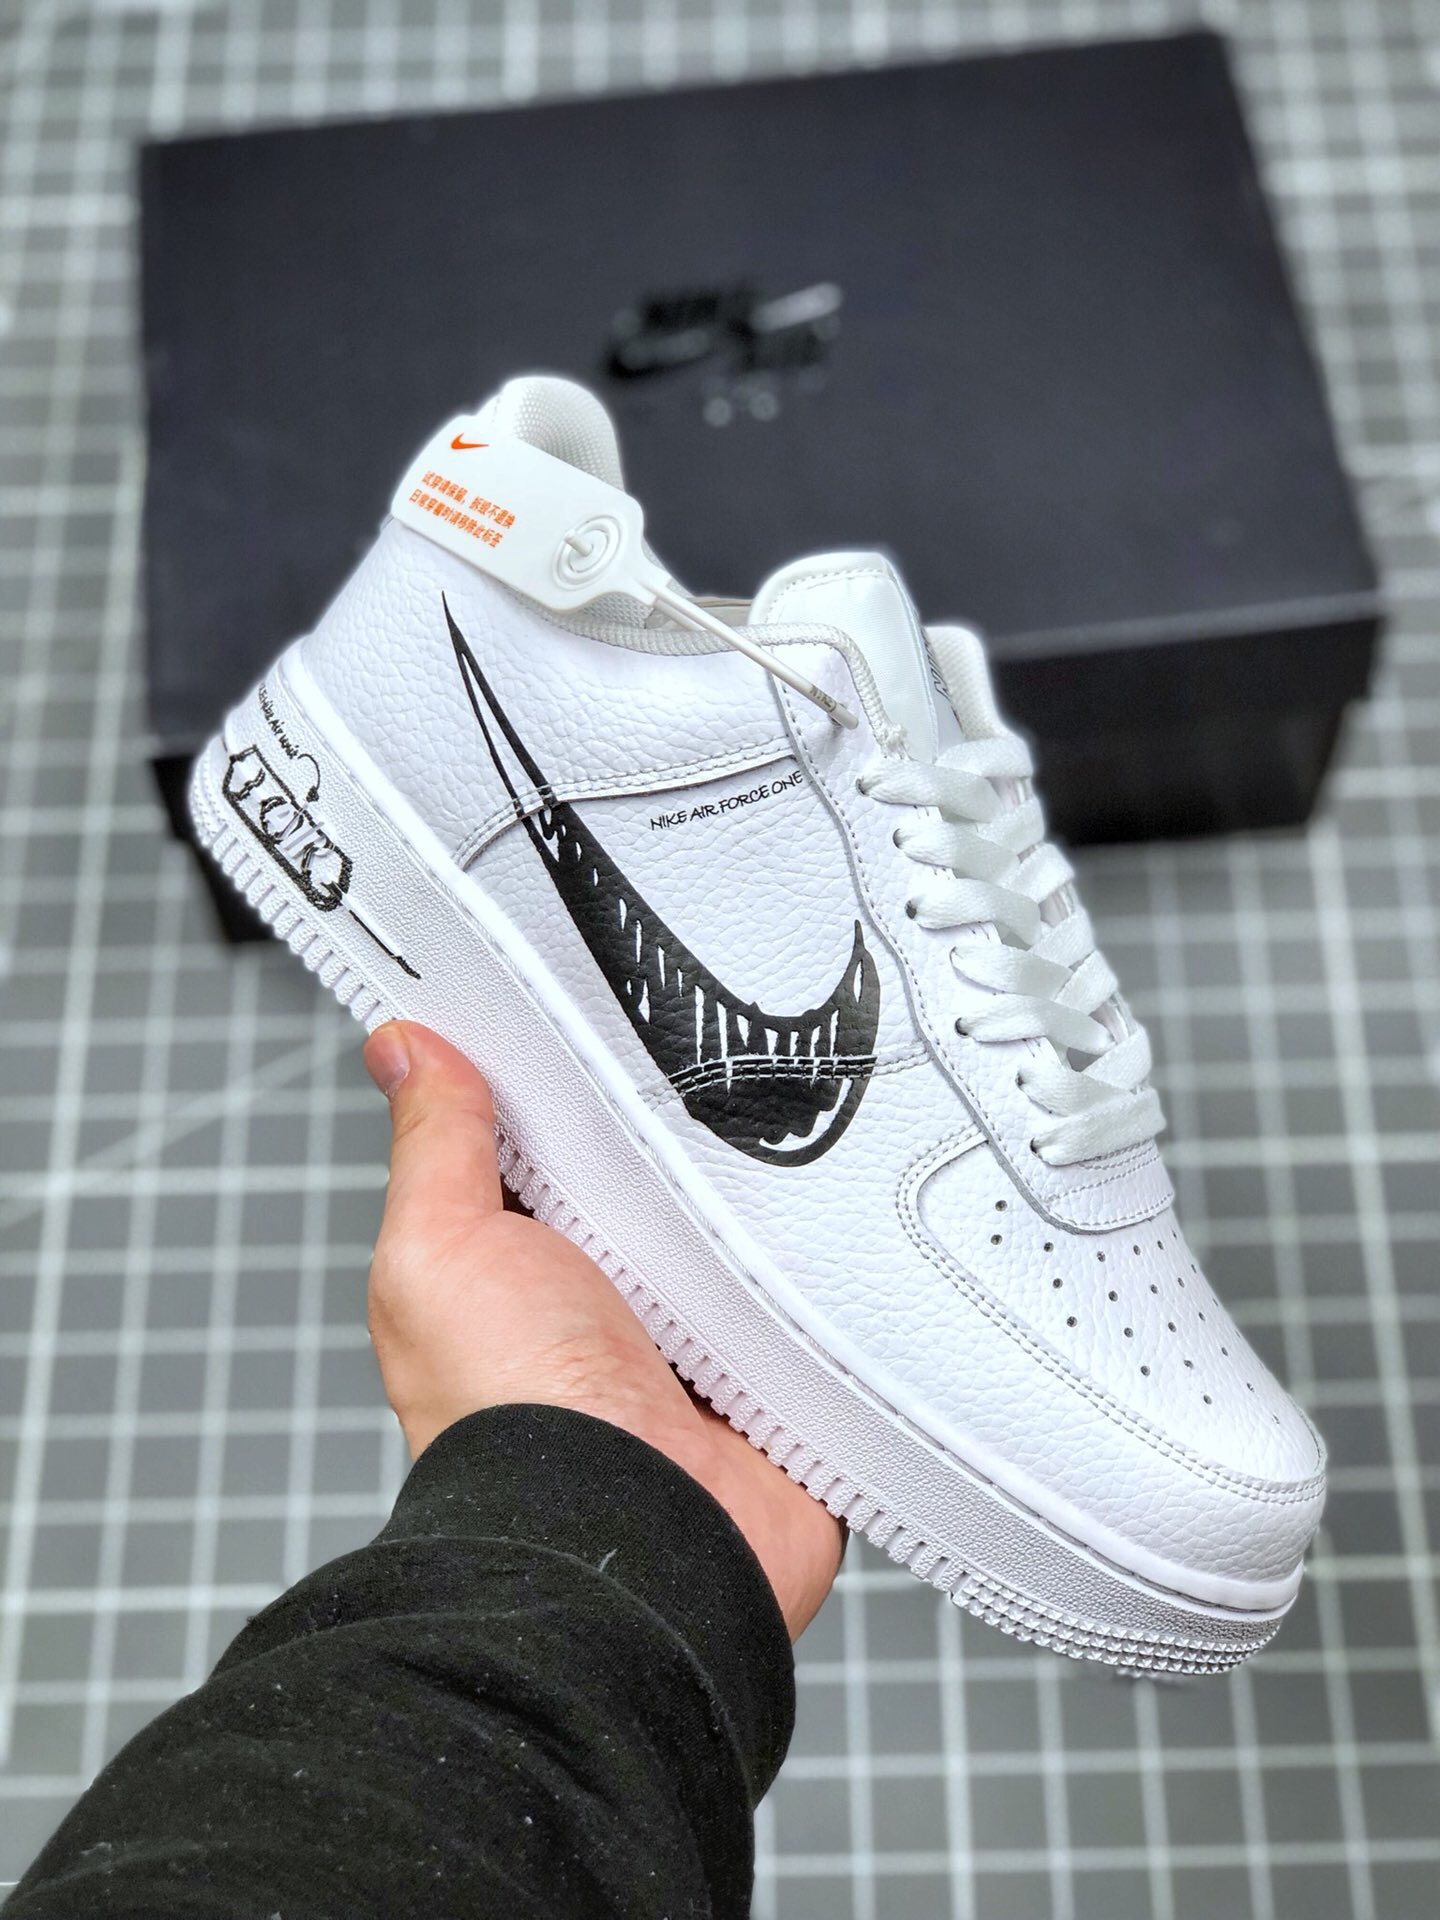 Nike Air Force 1 Low ‘Sketch’ White Black 2020 For Sale – Sneaker Hello